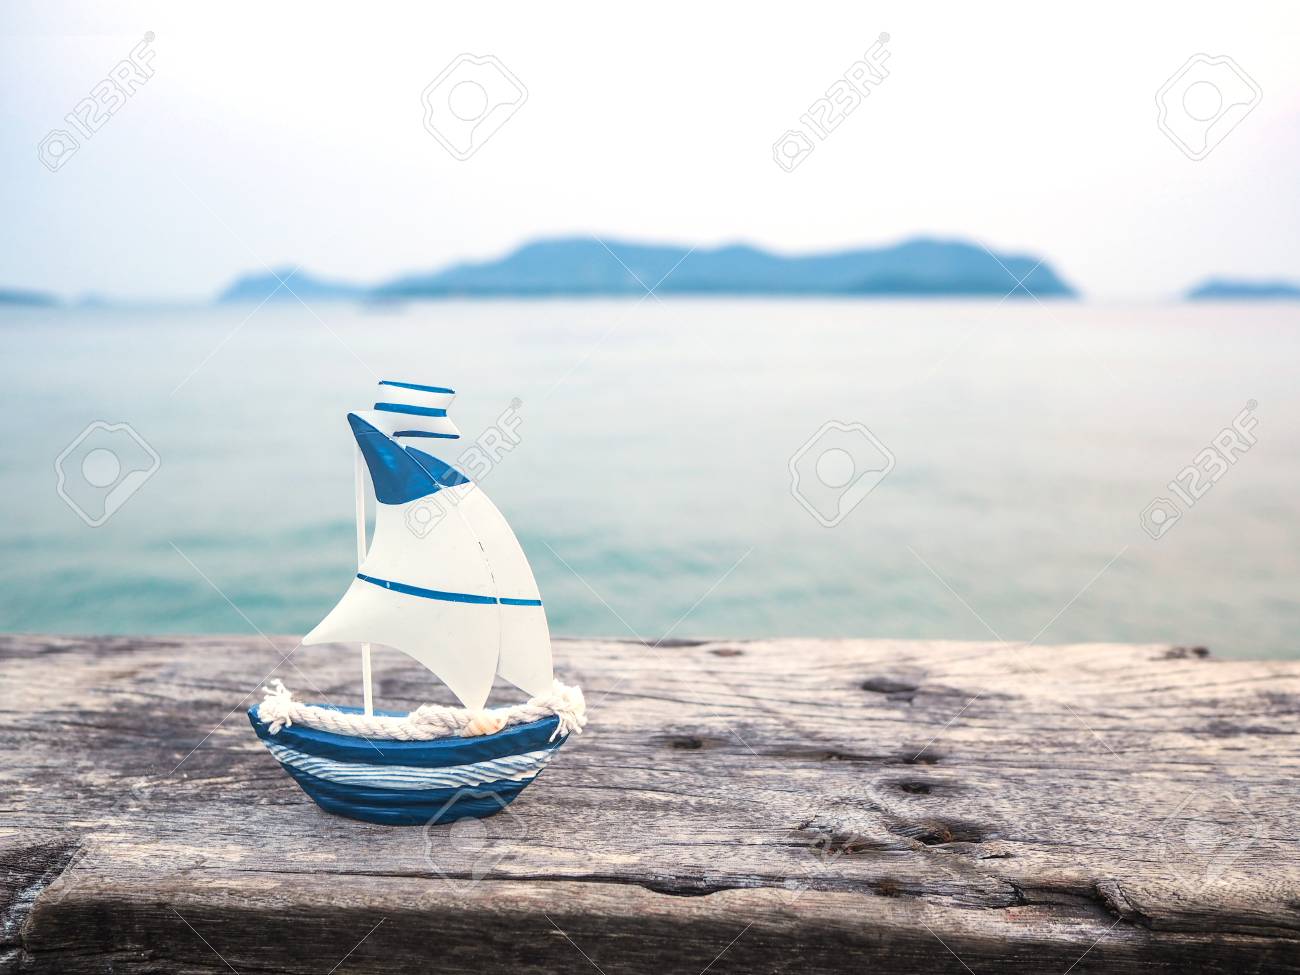 100897837-close-up-small-white-and-blue-boat-toy-on-wood-plank-over-sea-background-with-copy-space-vacation-on.jpg